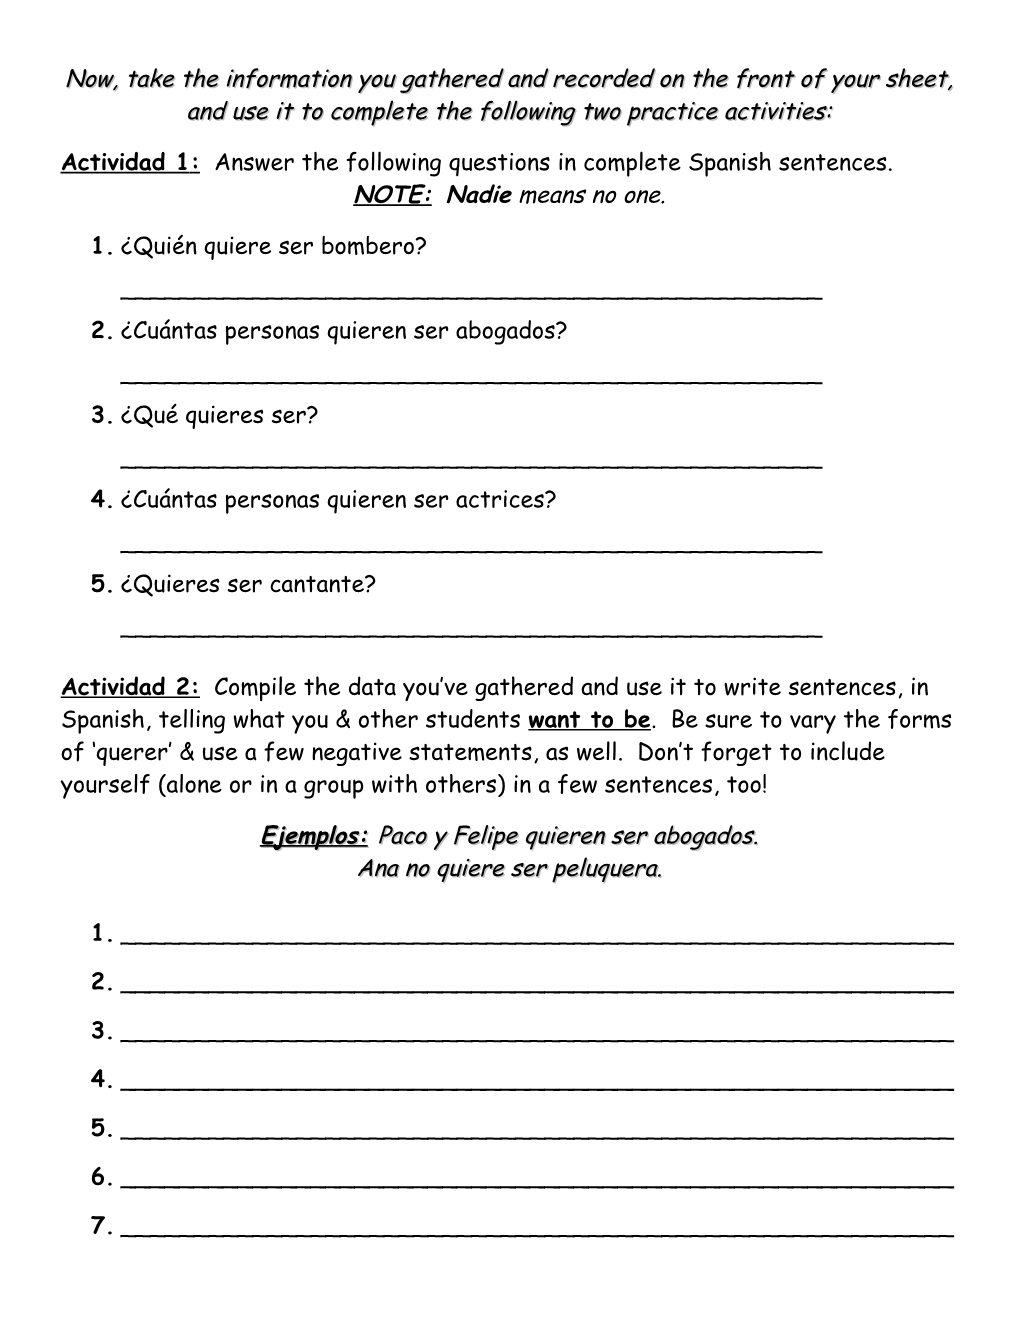 Actividad 1: Answer the Following Questions in Complete Spanish Sentences